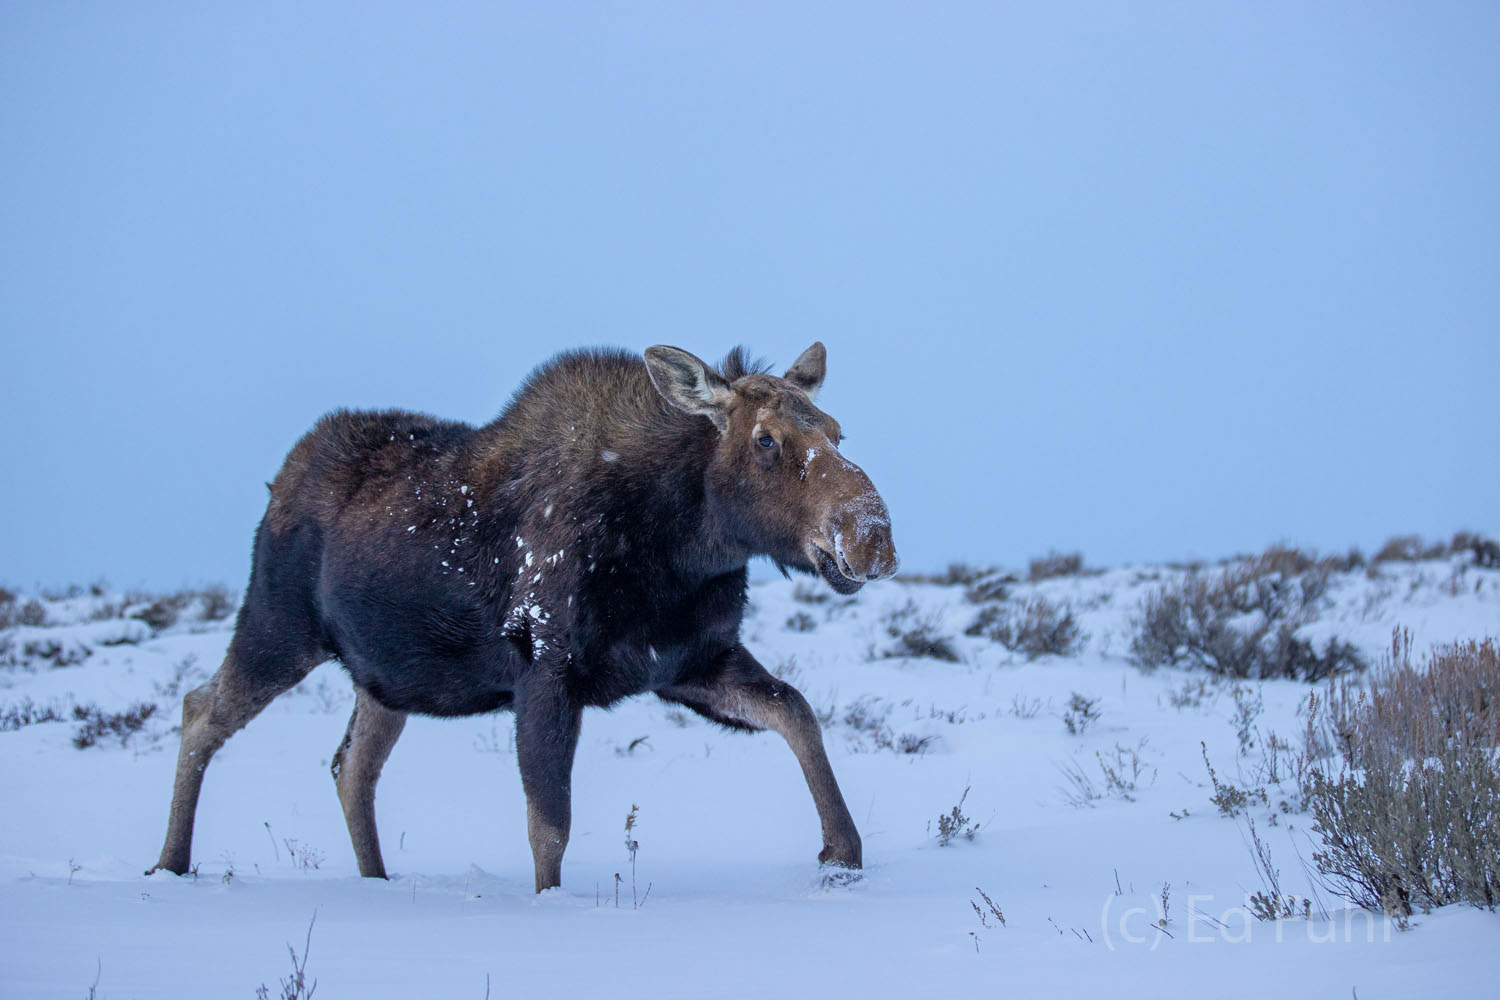 A cow moose makes her way into a strong wind that heralds the arrival of yet another winter storm.